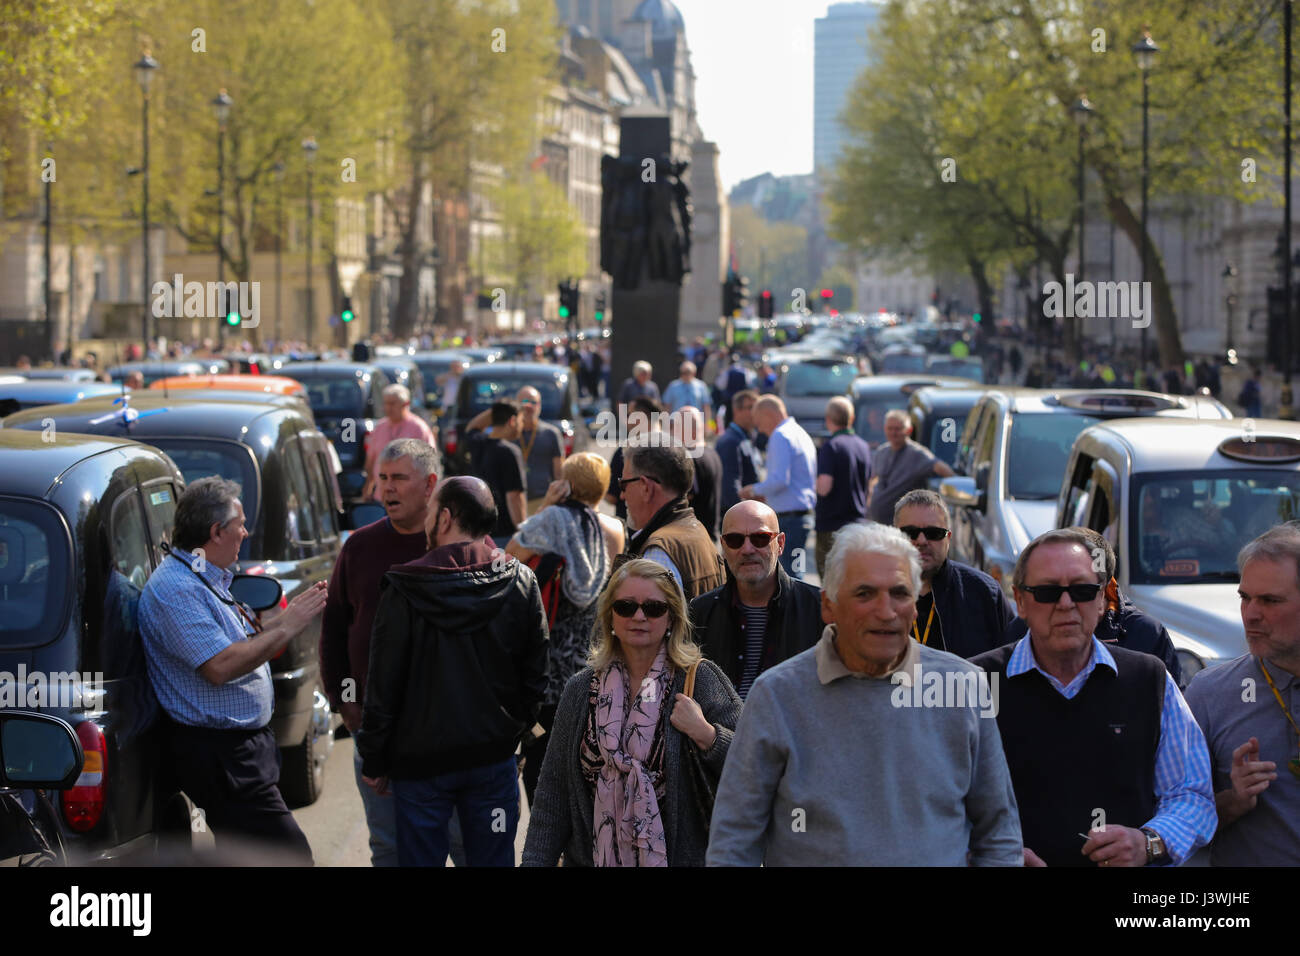 London Black Taxi drivers protest in London's Whitehall. The cabbies are demanding a parliamentary enquiry into the alleged relationship between former Prime Minister David Cameron and George Osborne and their links to private hire company Uber. Featuring: Atmosphere Where: London, United Kingdom When: 06 Apr 2017 Stock Photo